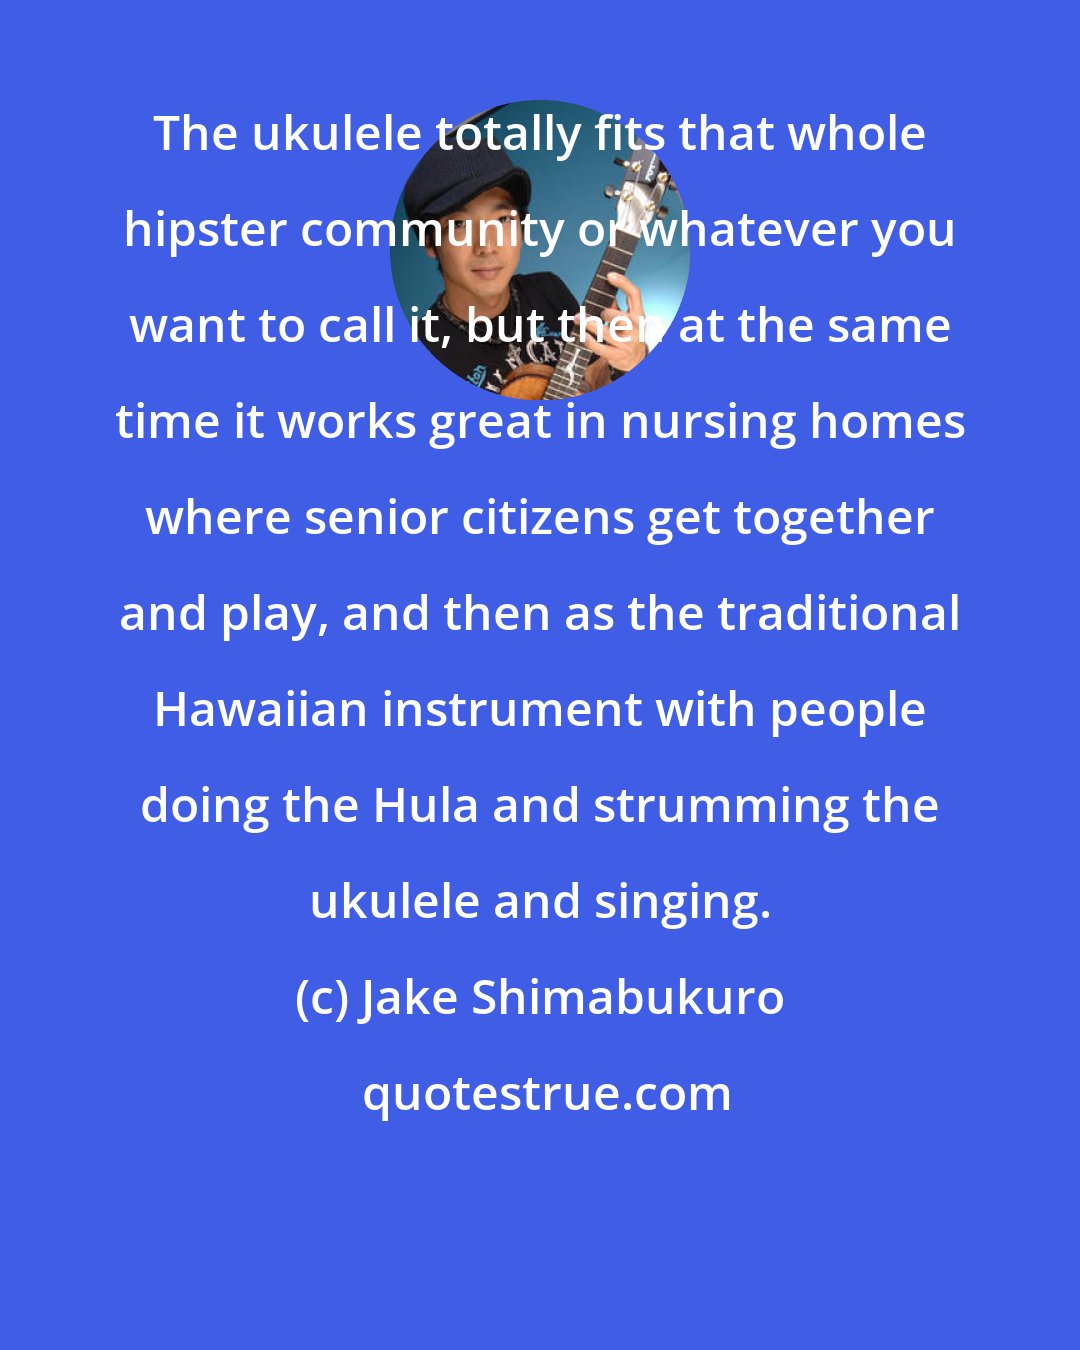 Jake Shimabukuro: The ukulele totally fits that whole hipster community or whatever you want to call it, but then at the same time it works great in nursing homes where senior citizens get together and play, and then as the traditional Hawaiian instrument with people doing the Hula and strumming the ukulele and singing.